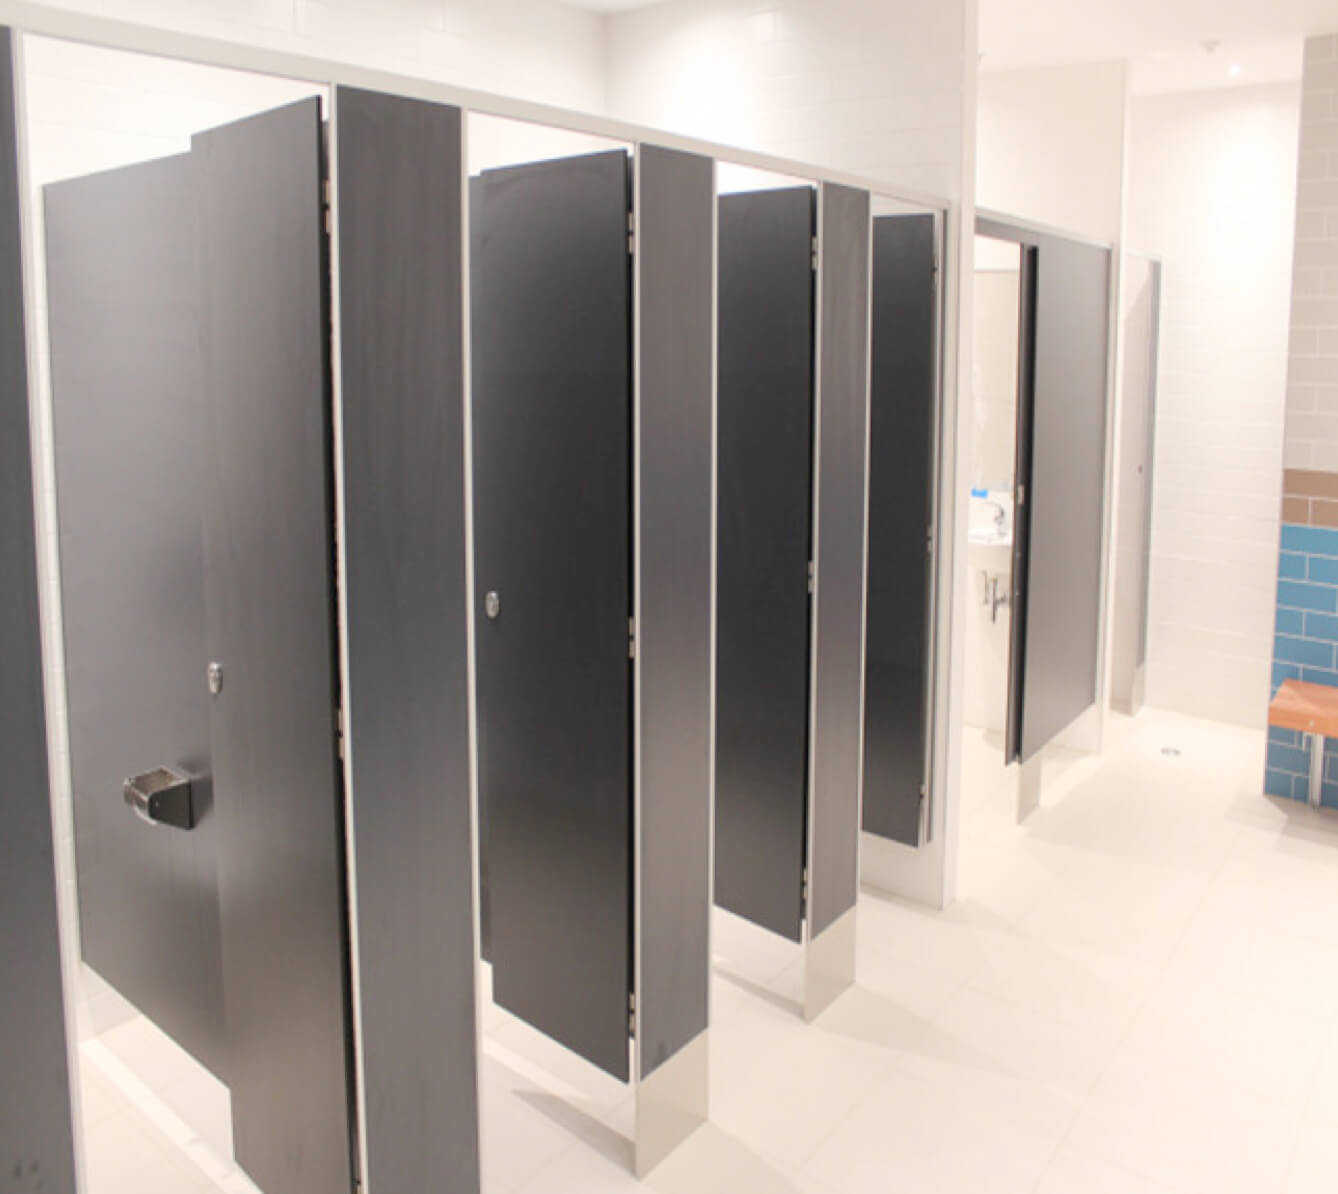 brikley-toilet-cubicles-sales-buy-best-toilet-partitions-system-products-on-jiangsu-jiashida